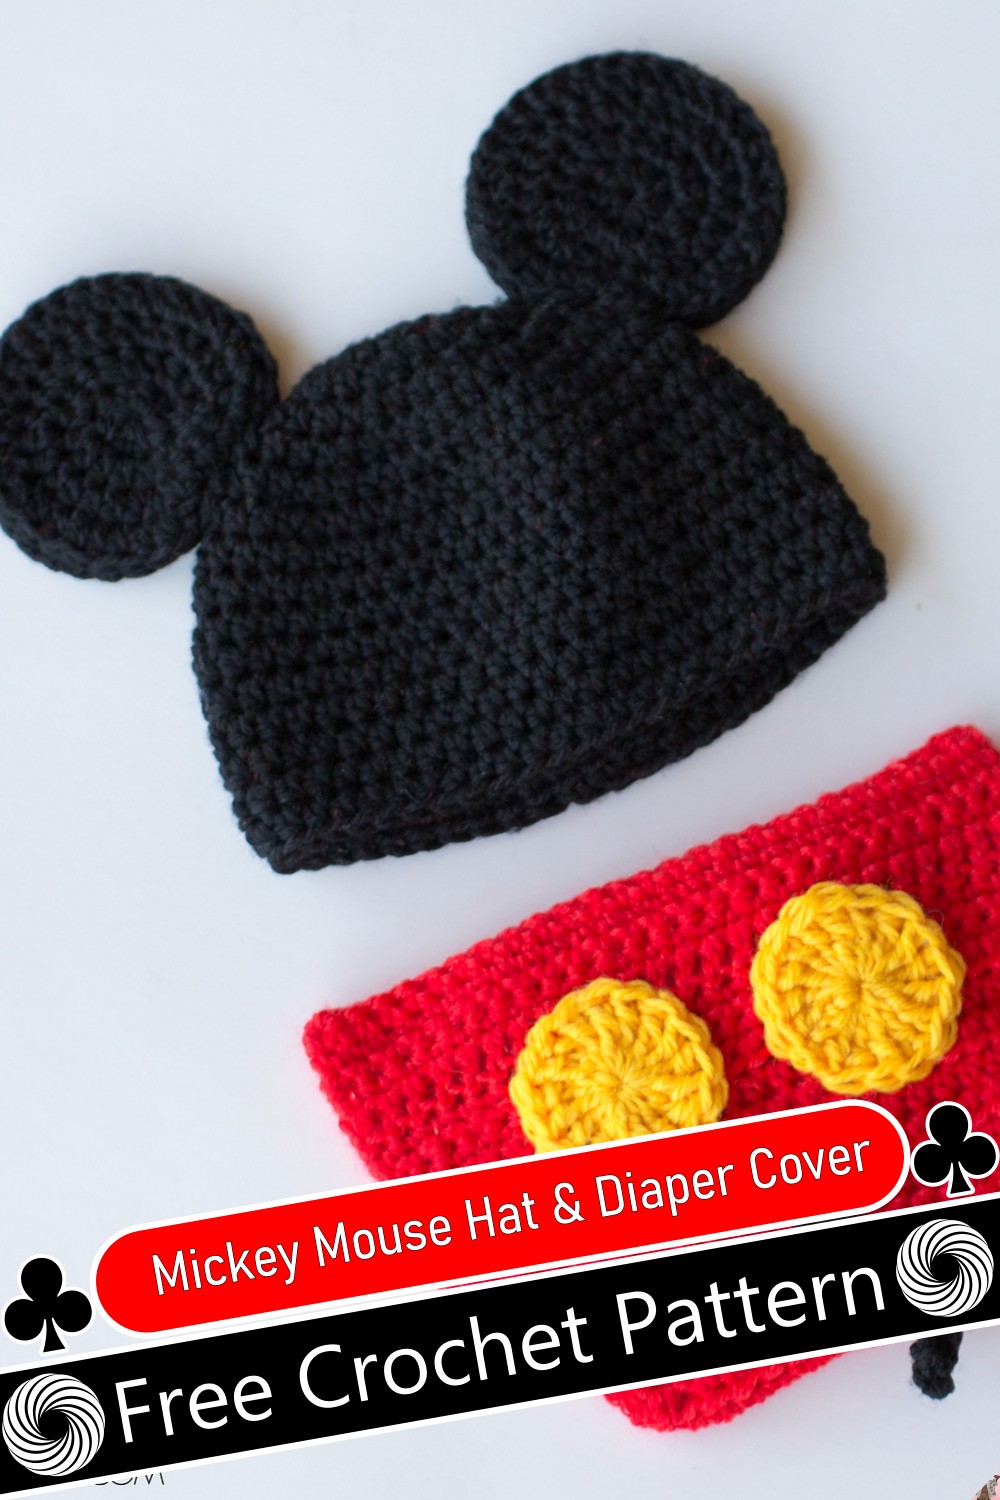 Mickey Mouse Hat & Cover